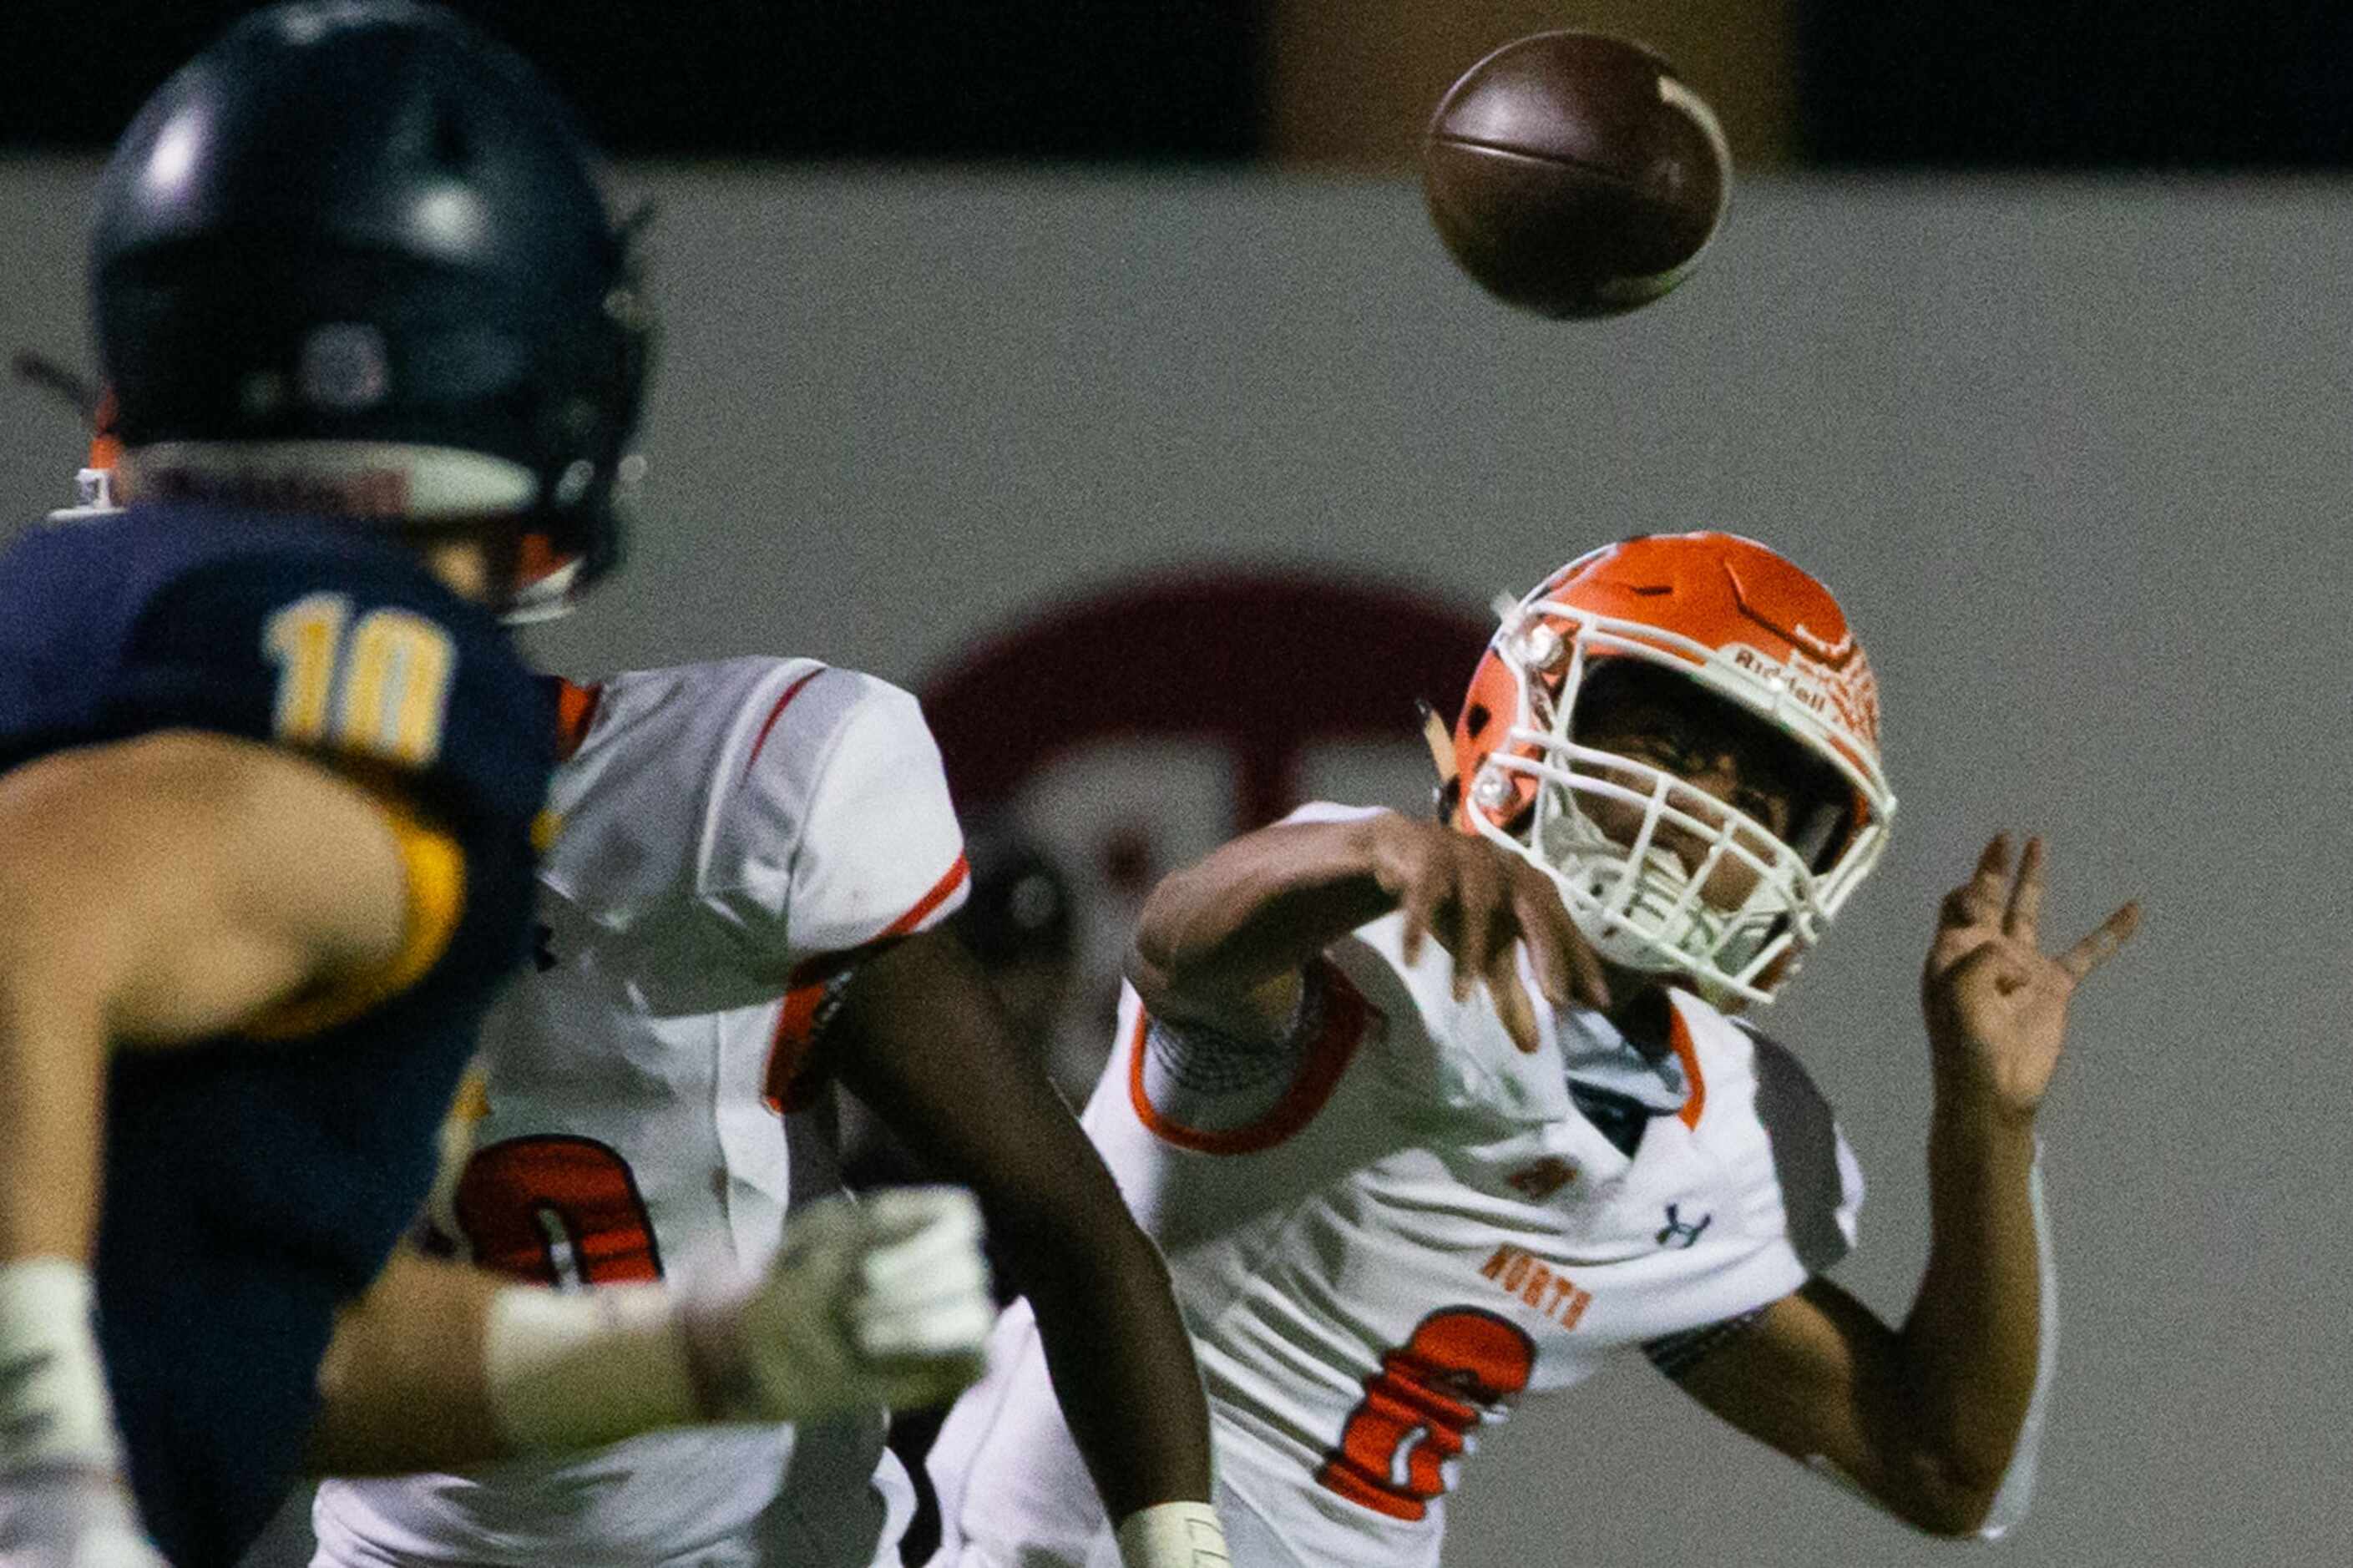 McKinney North quarterback Gavin Constantine (6) makes a pass during the first half of the...